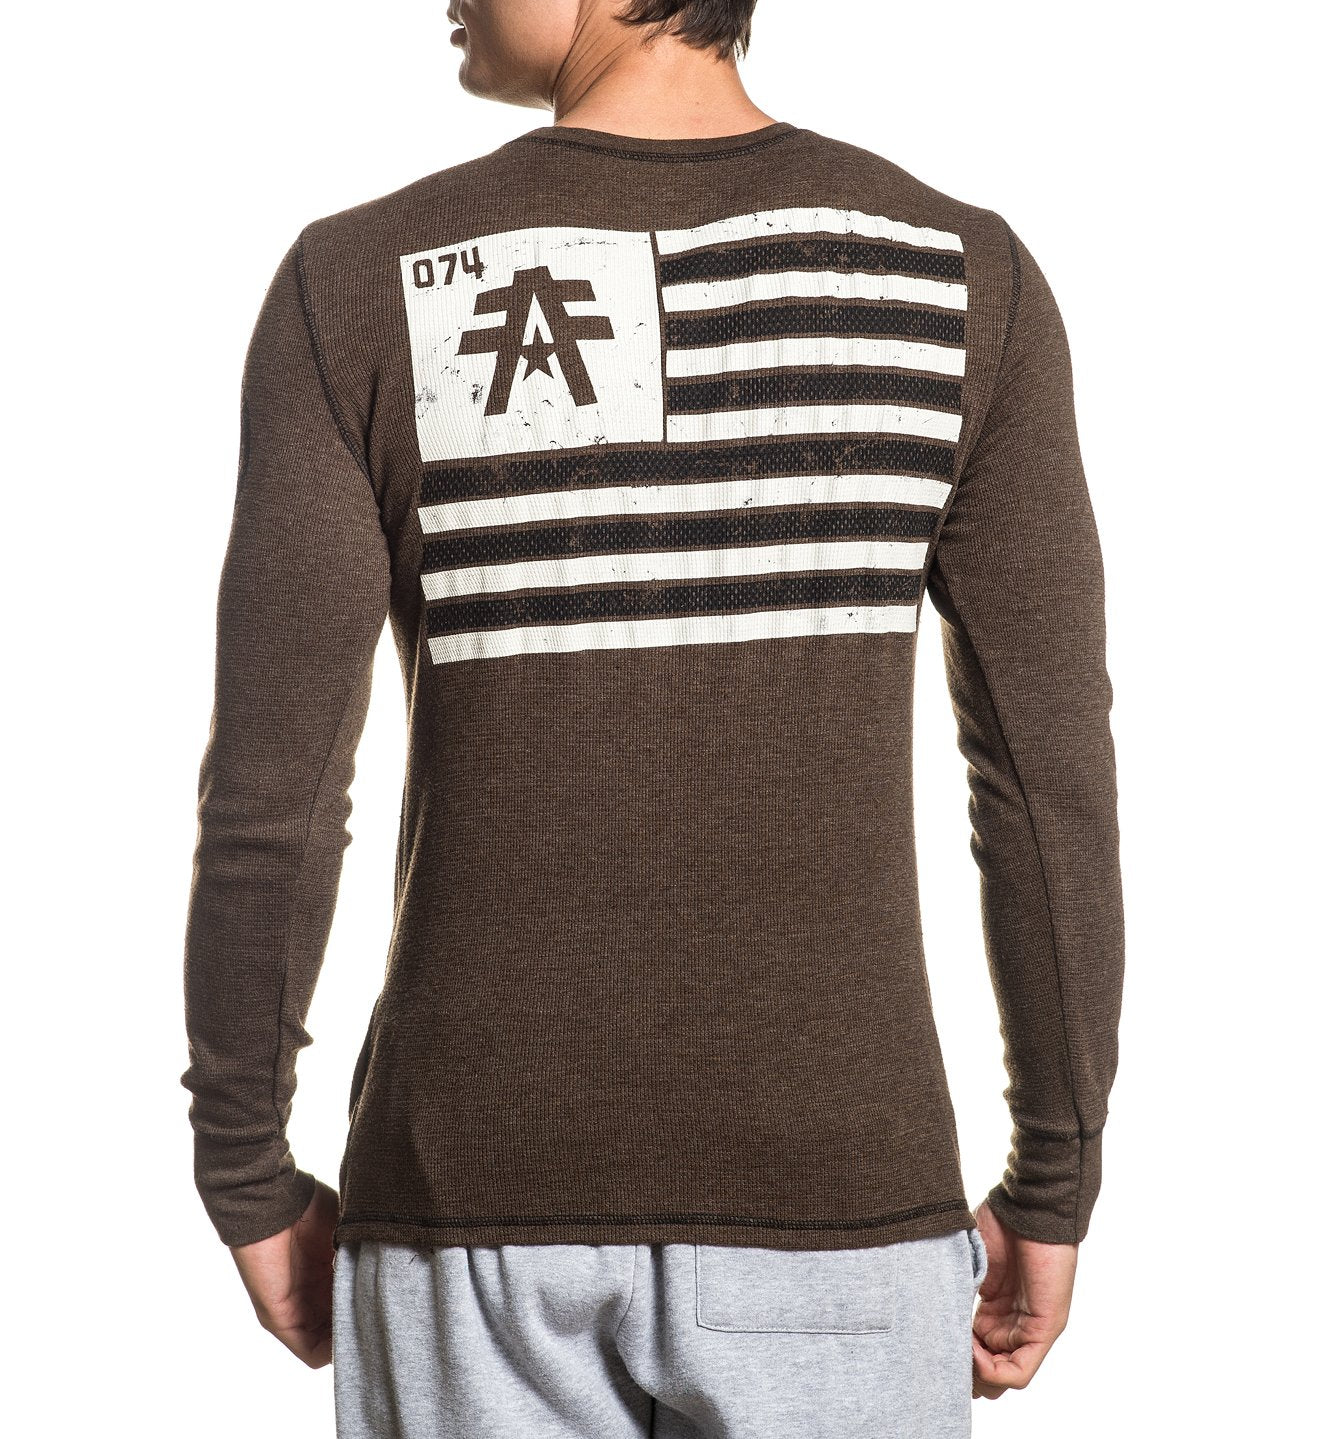 Albany - Mens Long Sleeve Tees - American Fighter